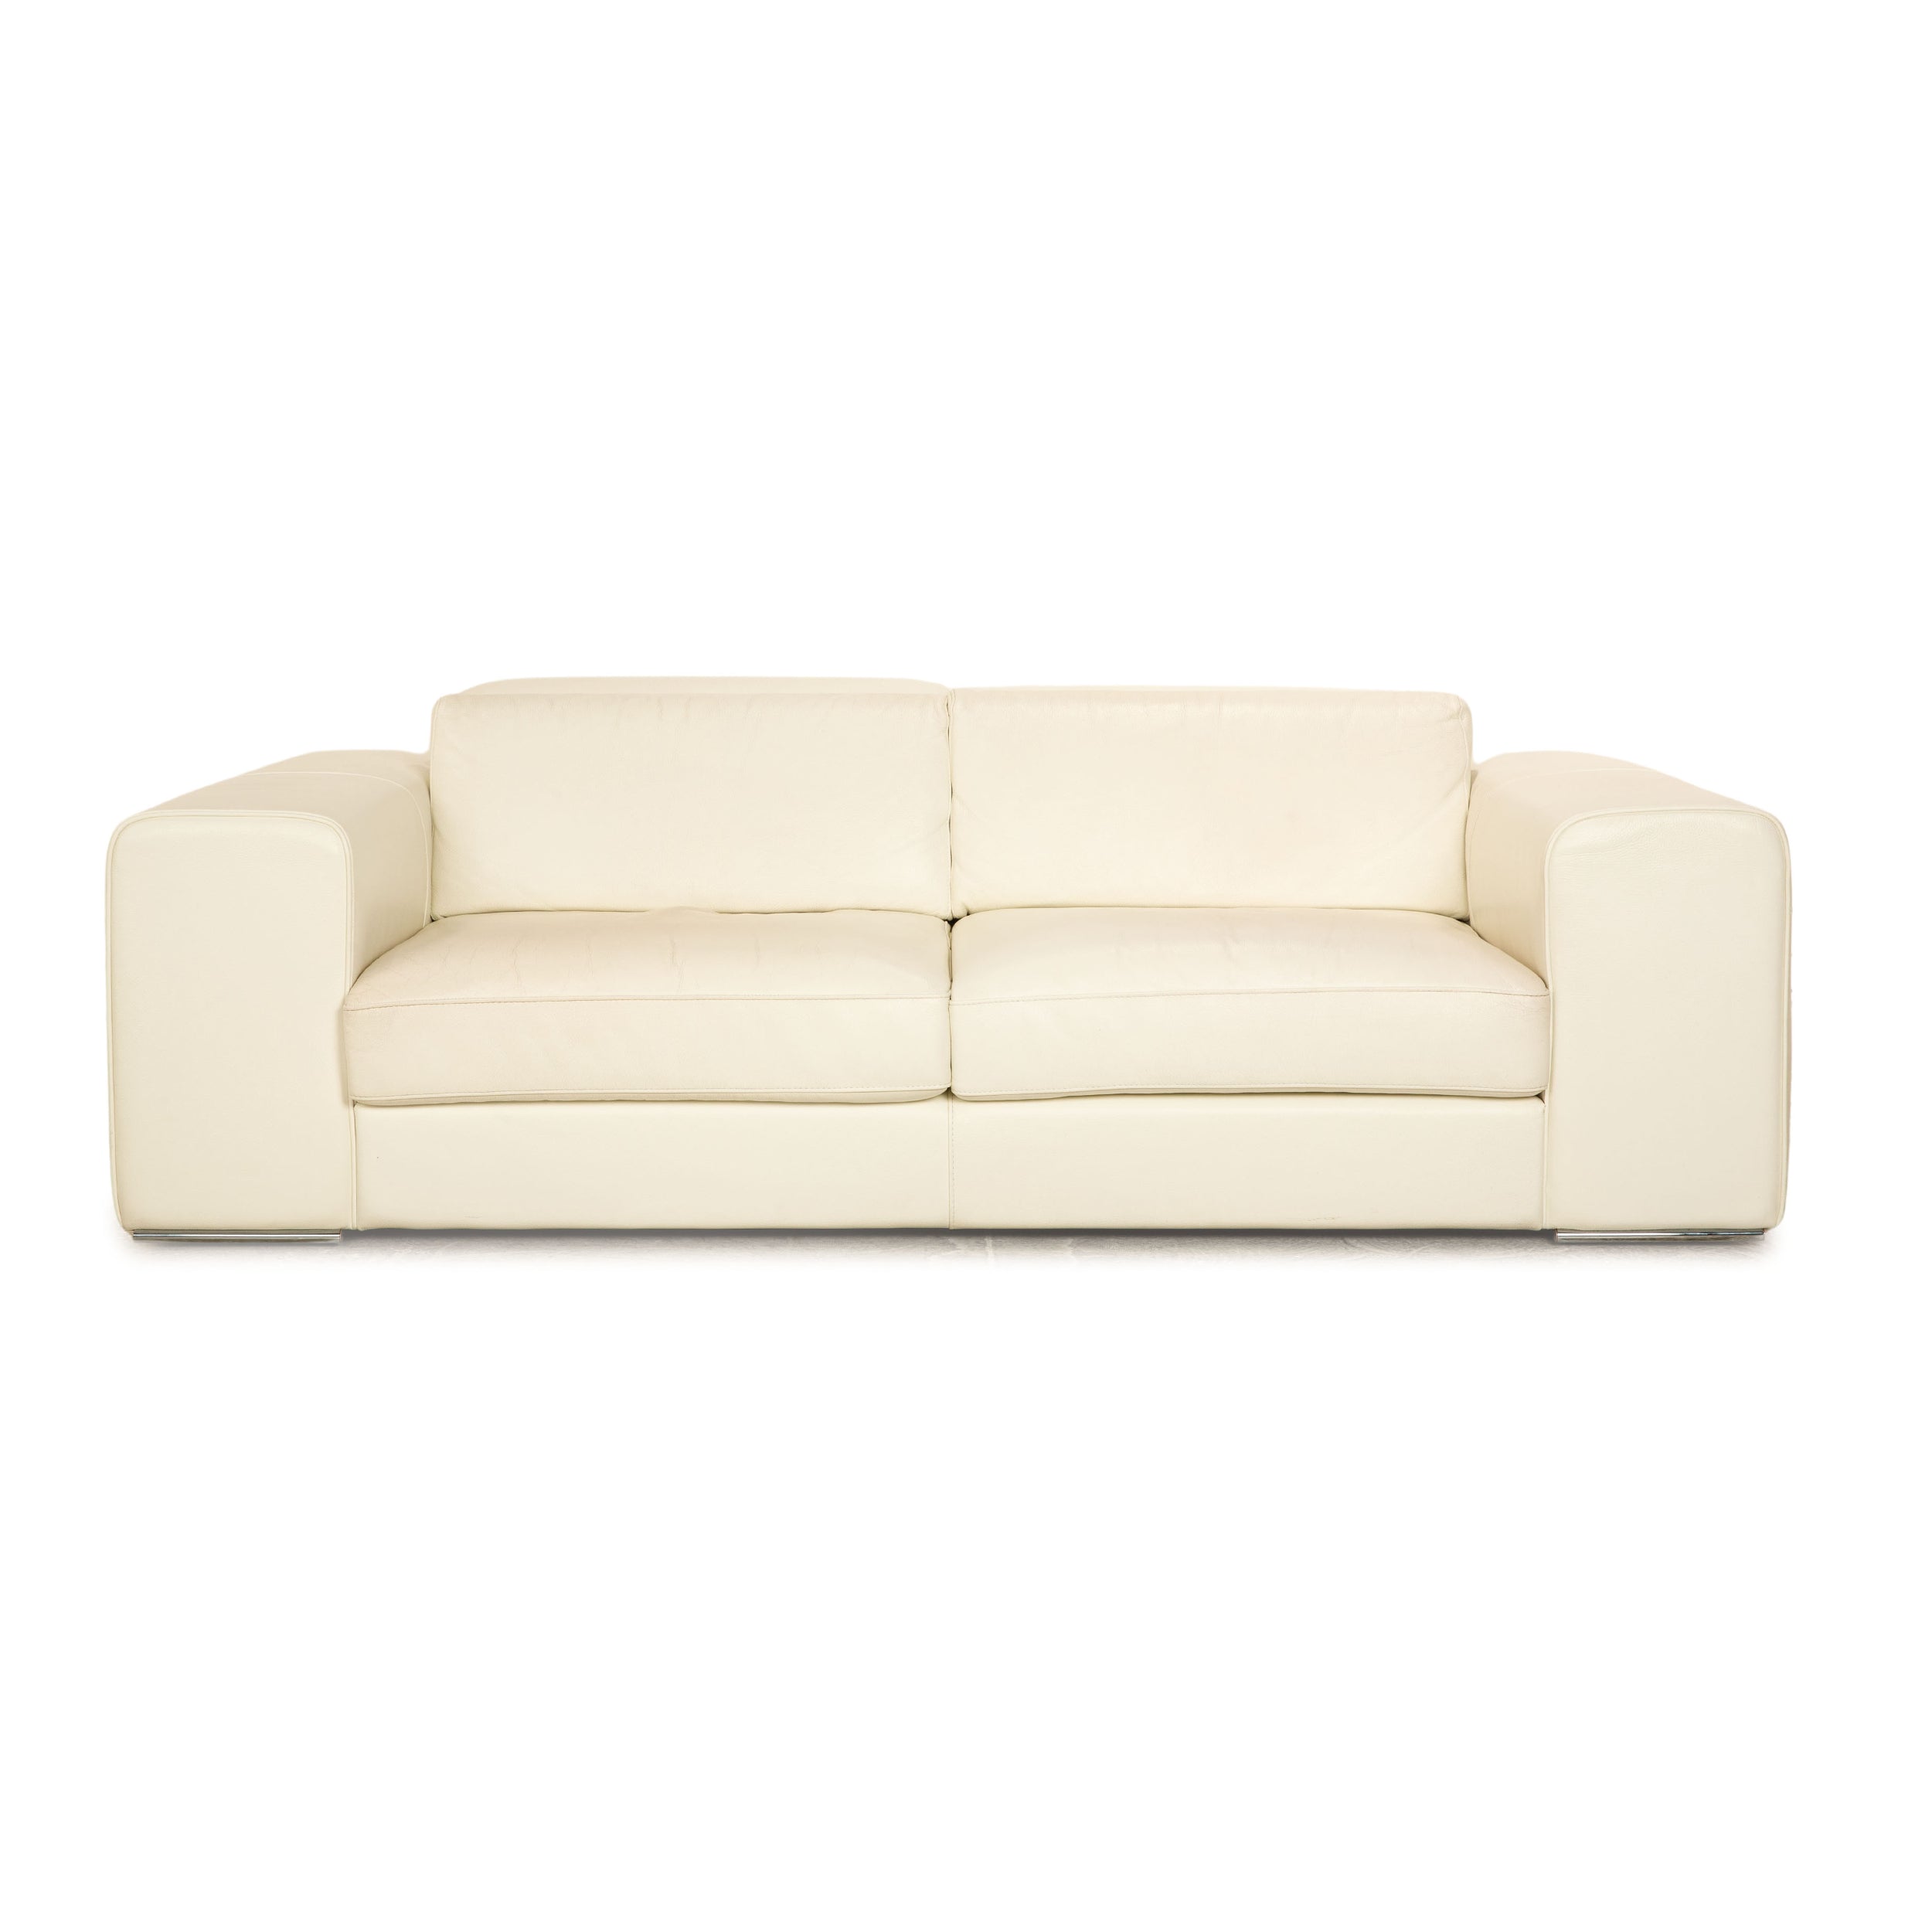 Who's Perfect Avenue Leather Two Seater Cream Sofa Couch Manual Function